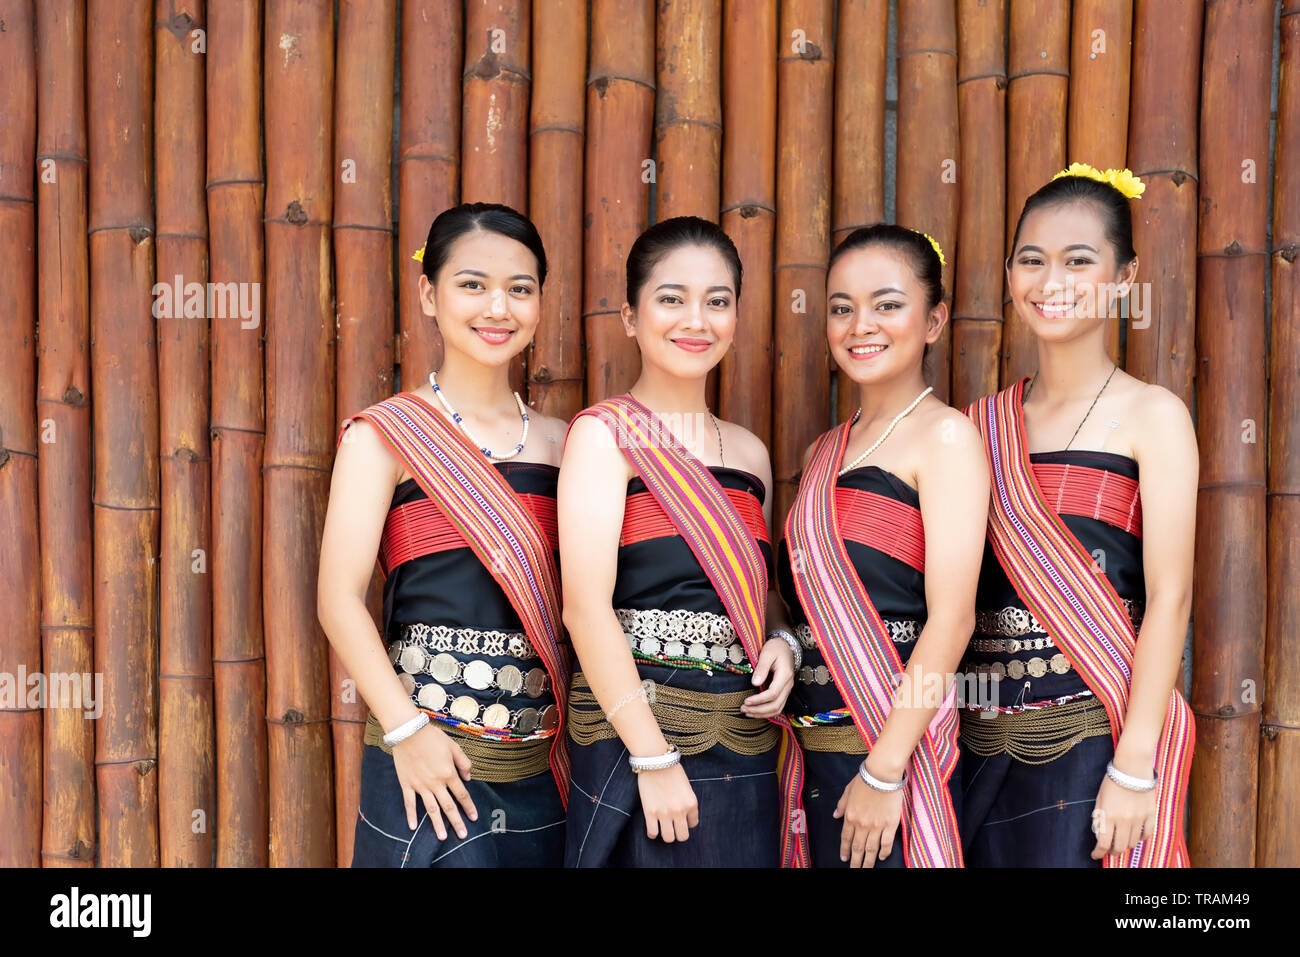 Group portrait of Kadazan Dusun young girls in traditional attire from Kota Belud district during state level Harvest Festival in KDCA, Kota Kinabalu, Stock Photo